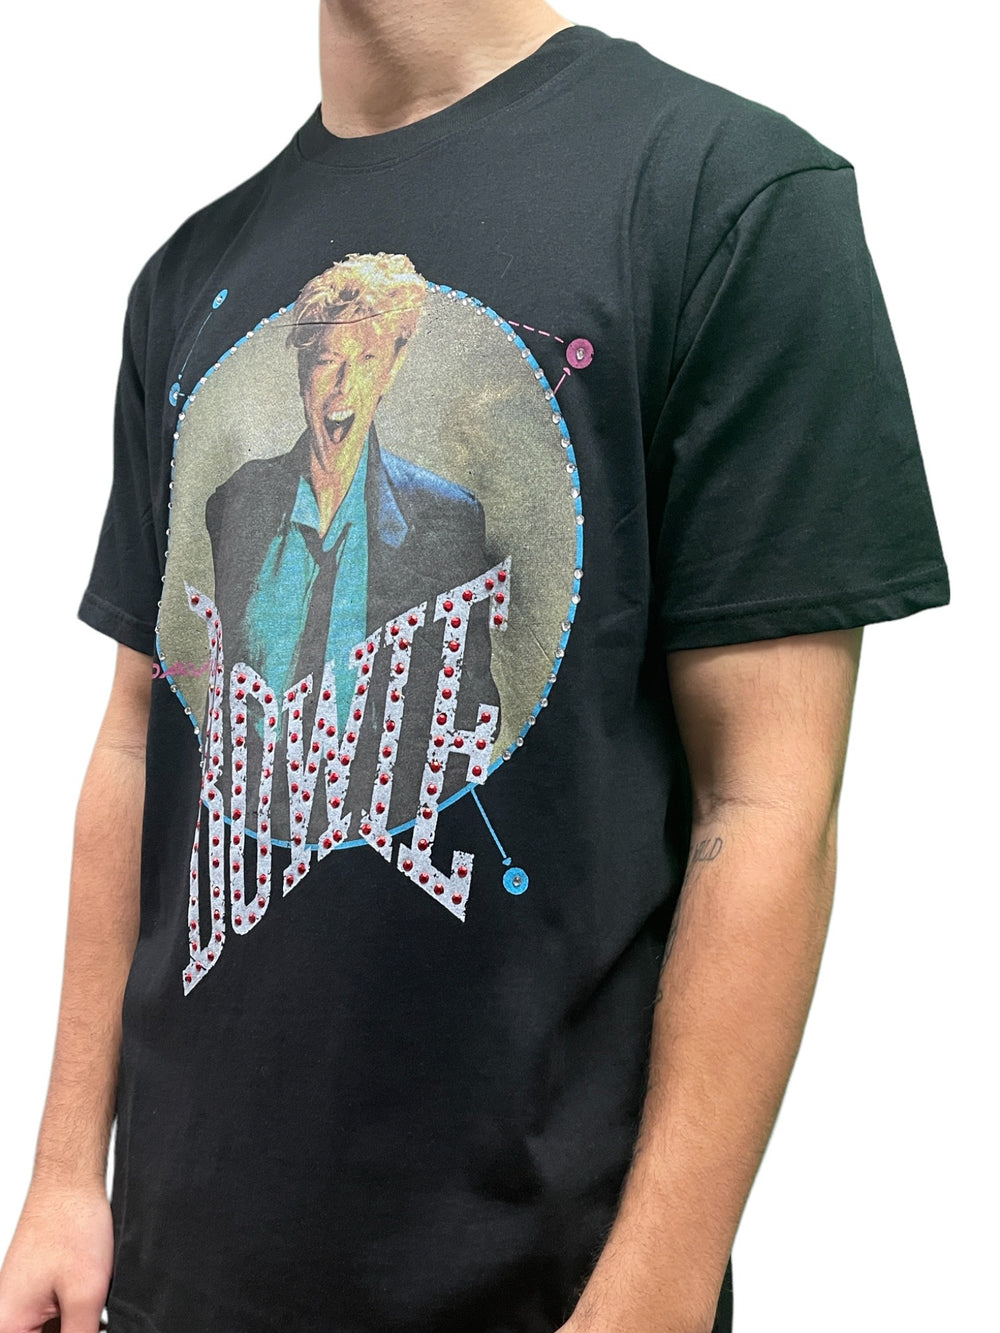 David Bowie - Scream 83' Embellished Official Unisex T-Shirt Various Sizes